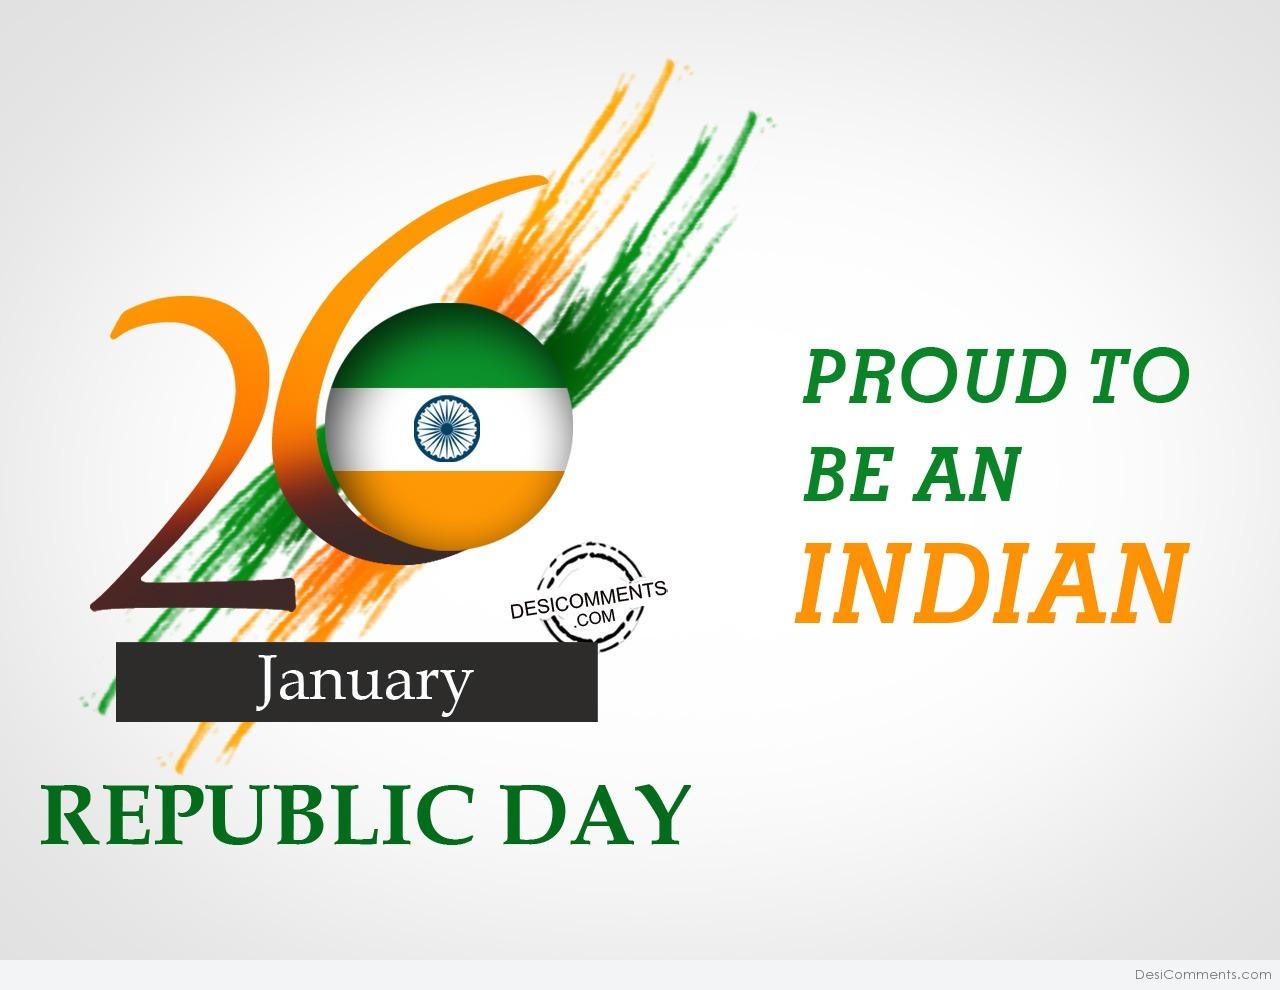 Proud to be an indian, Happy Republic Day - DesiComments.com